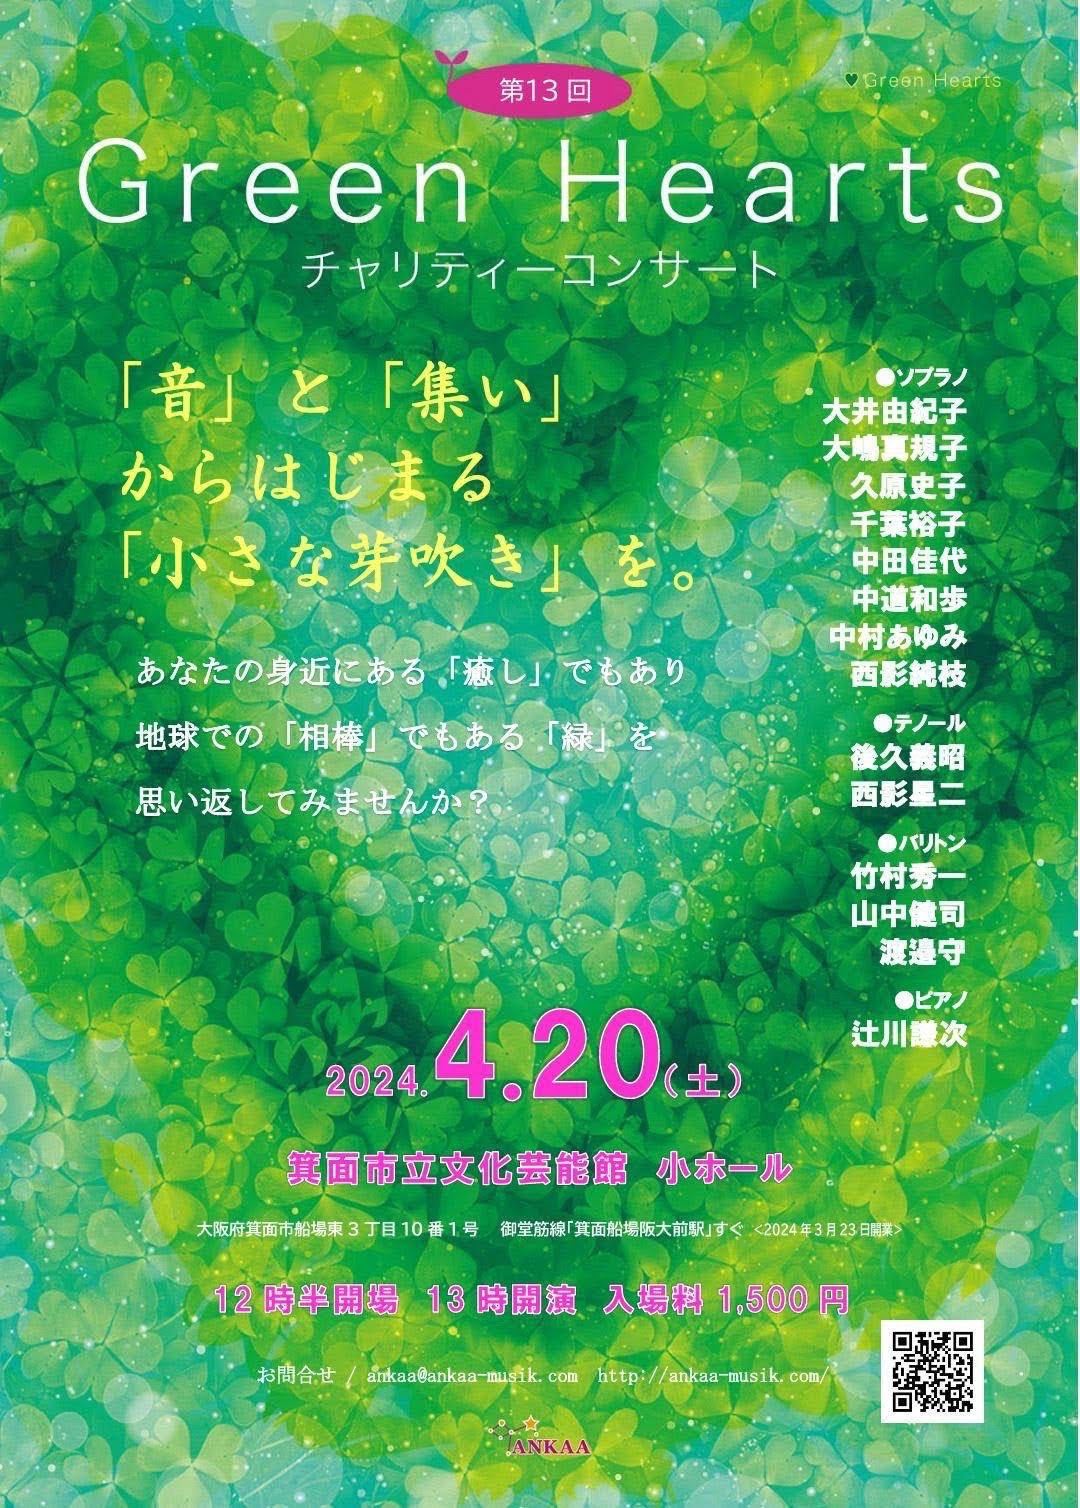 You are currently viewing 演奏会のお知らせ | 2024年4月20日（土）箕面市立文化芸能館のチャリティーコンサートのお知らせ